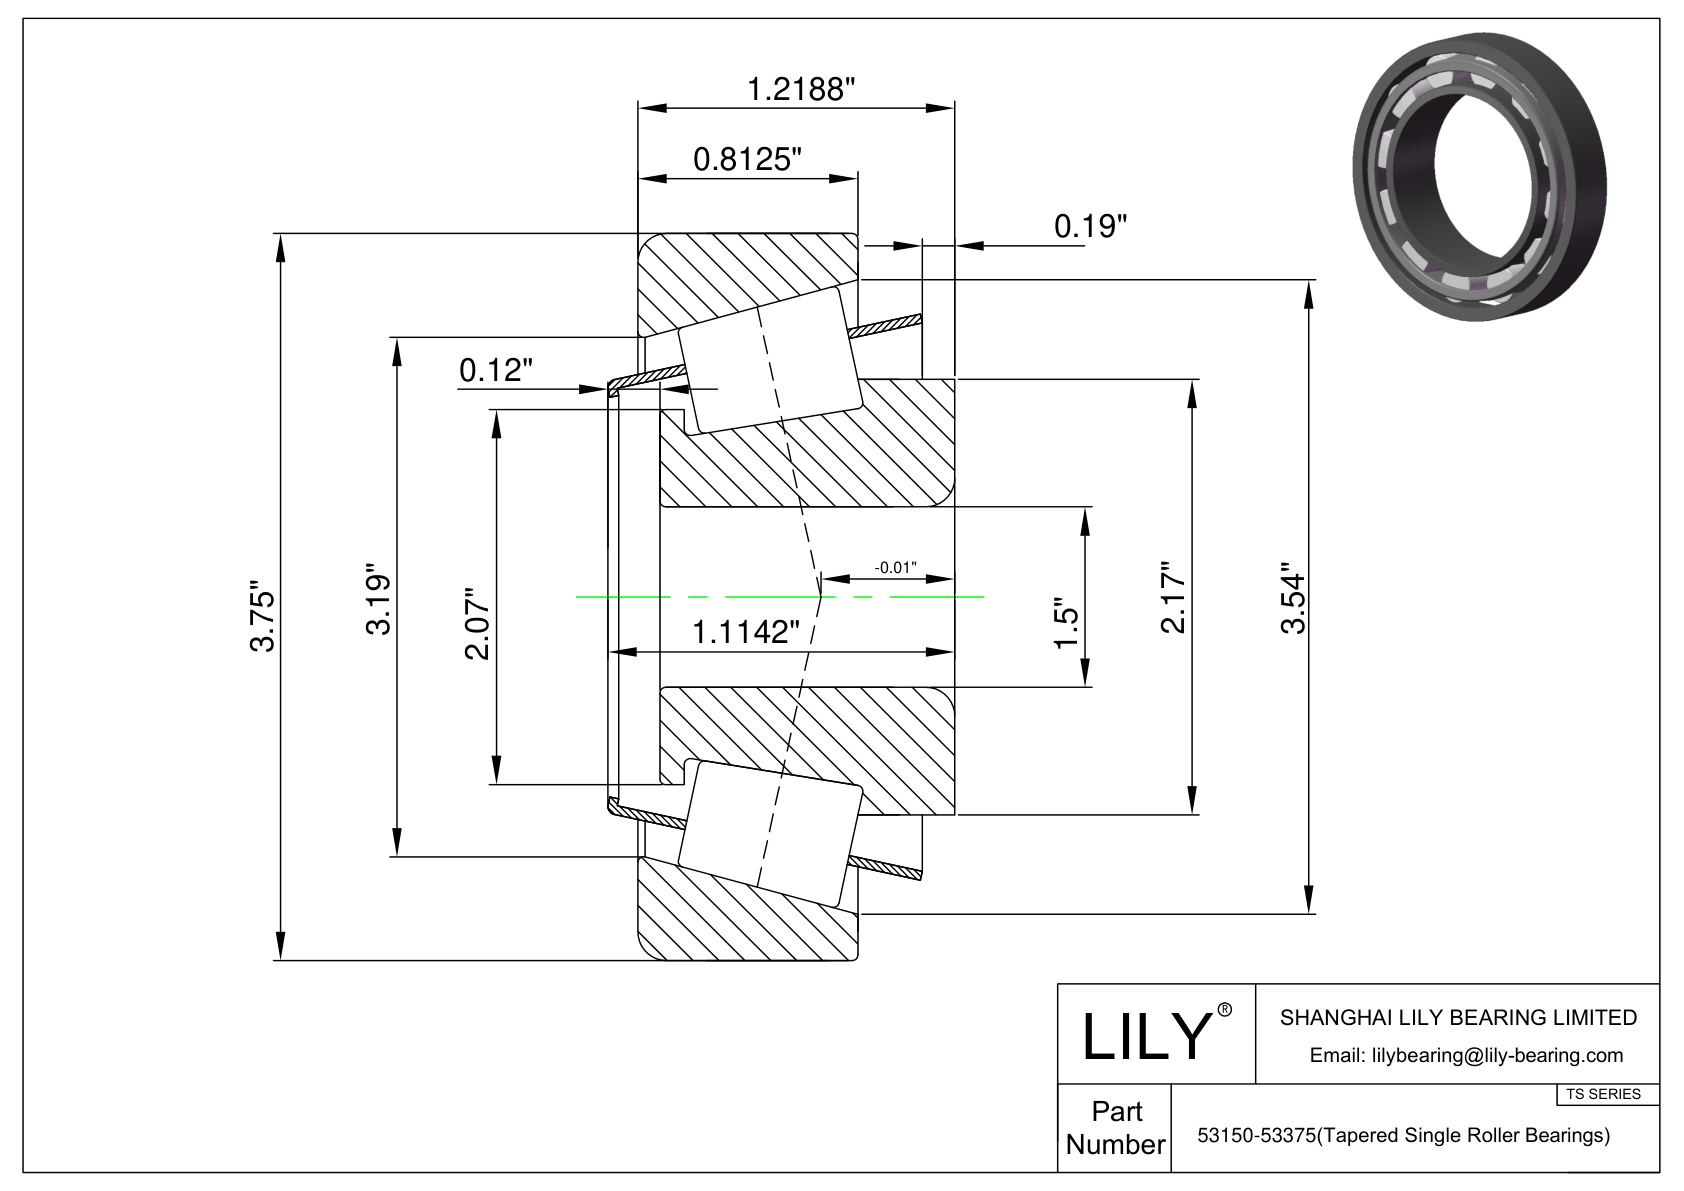 53150-53375 TS (Tapered Single Roller Bearings) (Imperial) cad drawing